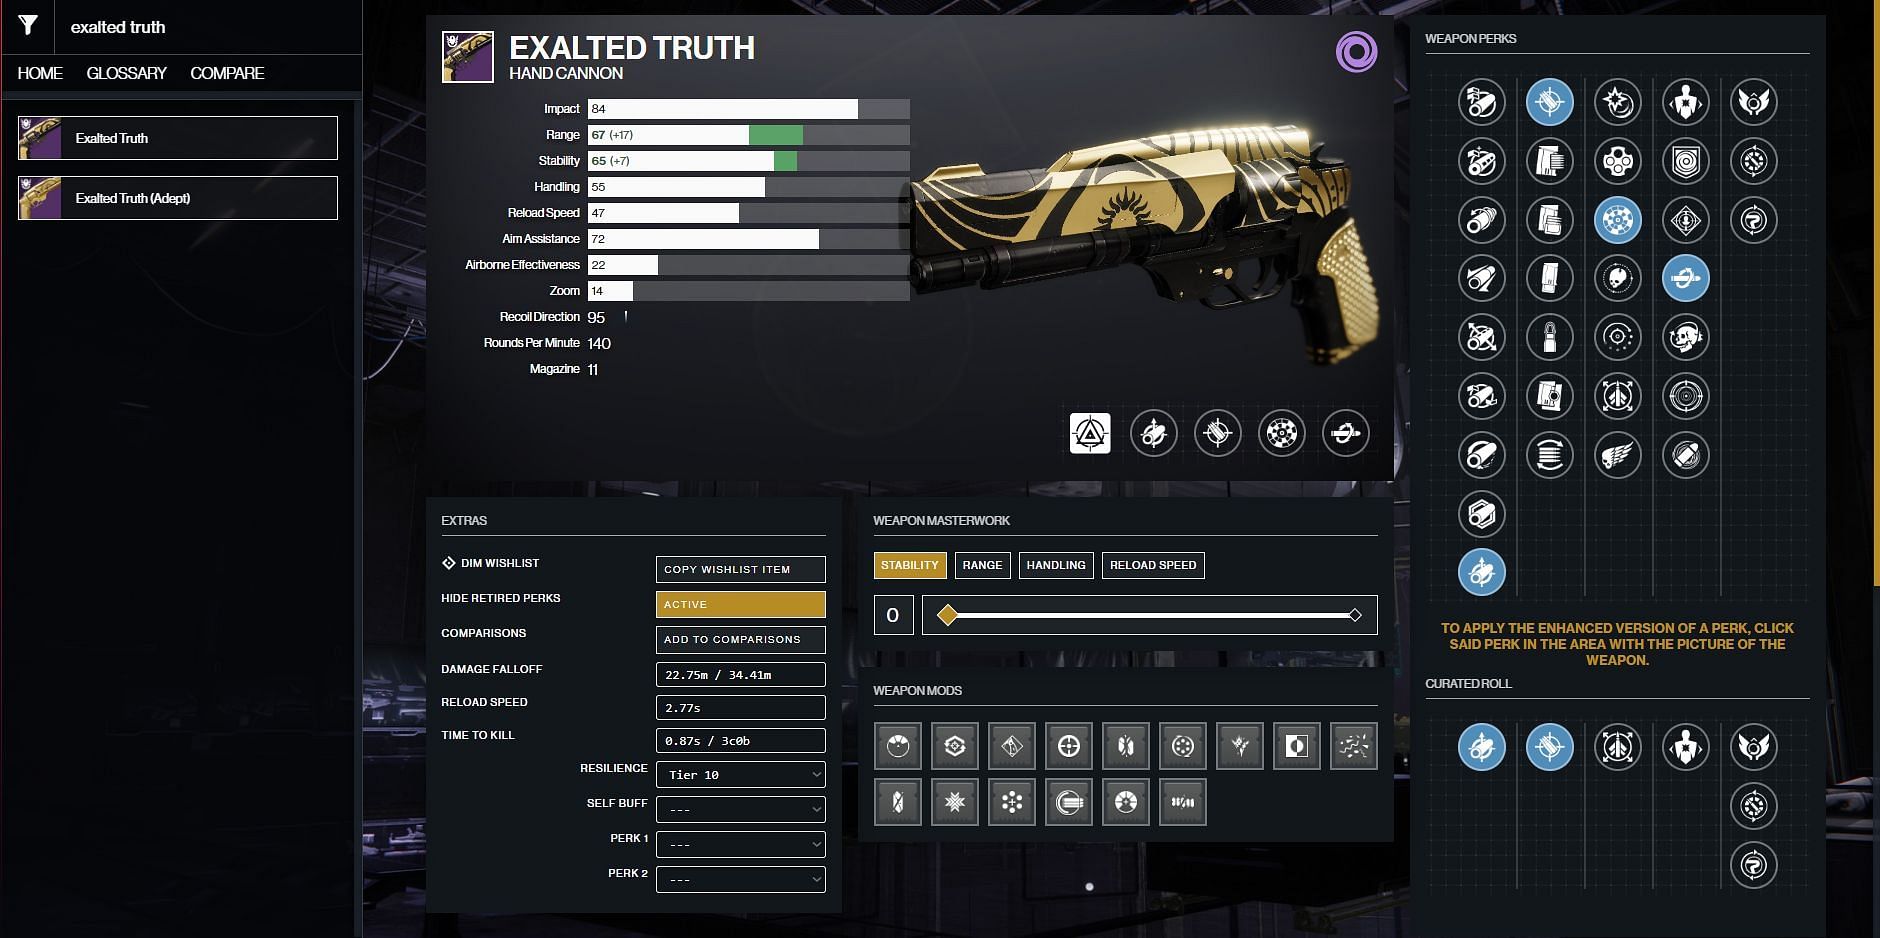 Exalted Truth Hand Cannon for Destiny 2 PvP (Image via Bungie)